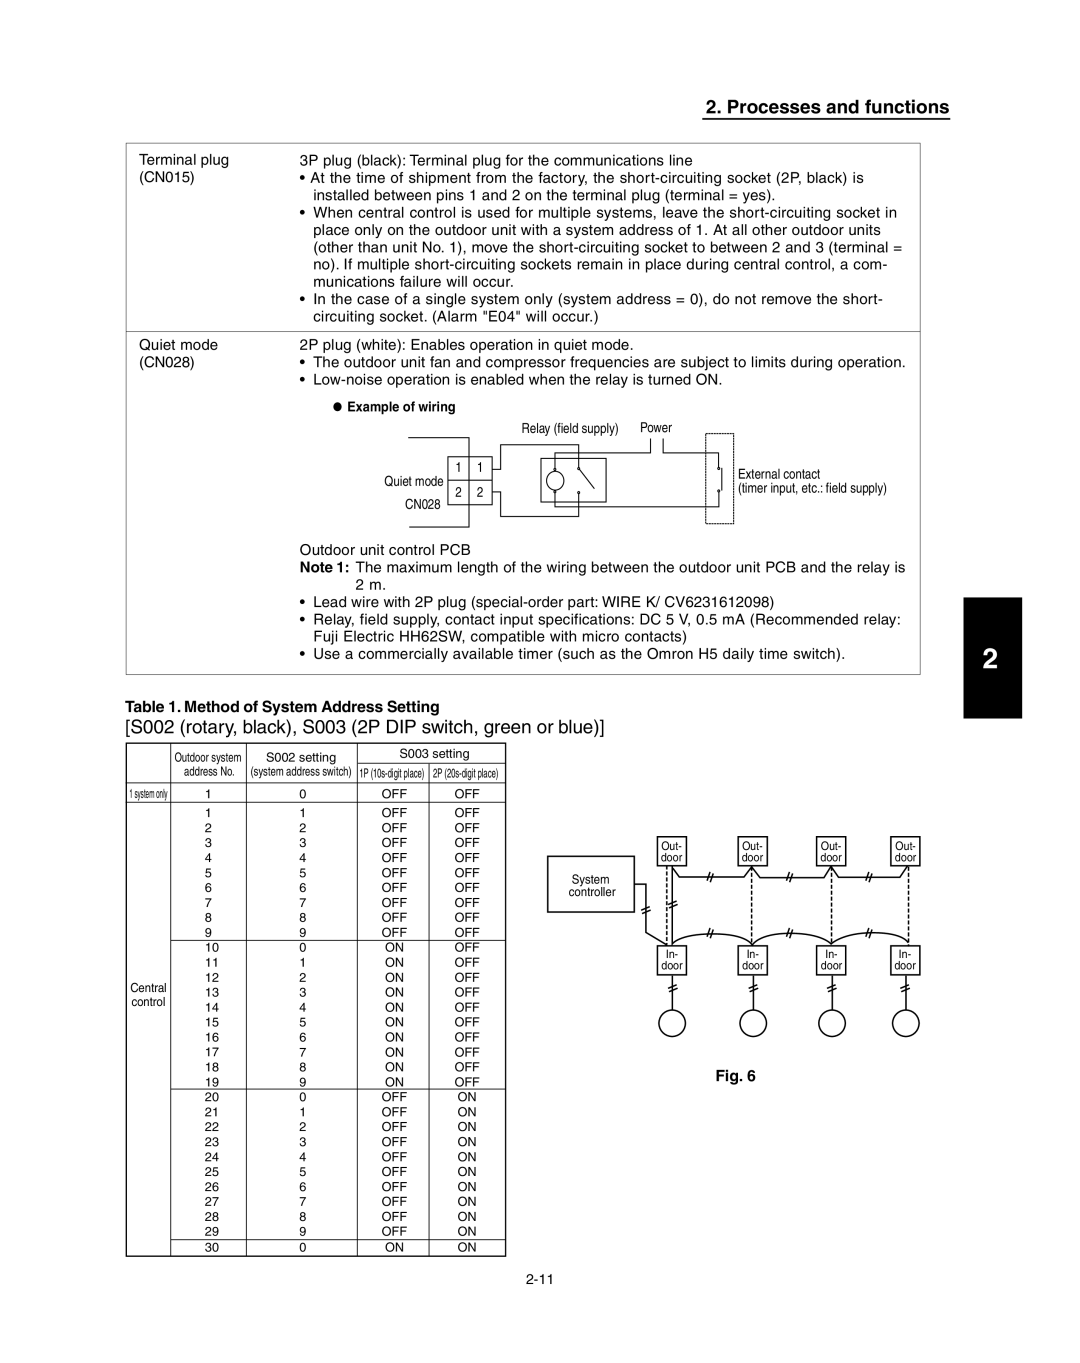 Panasonic R410A service manual Processes and functions, Method of System Address Setting, Fig 